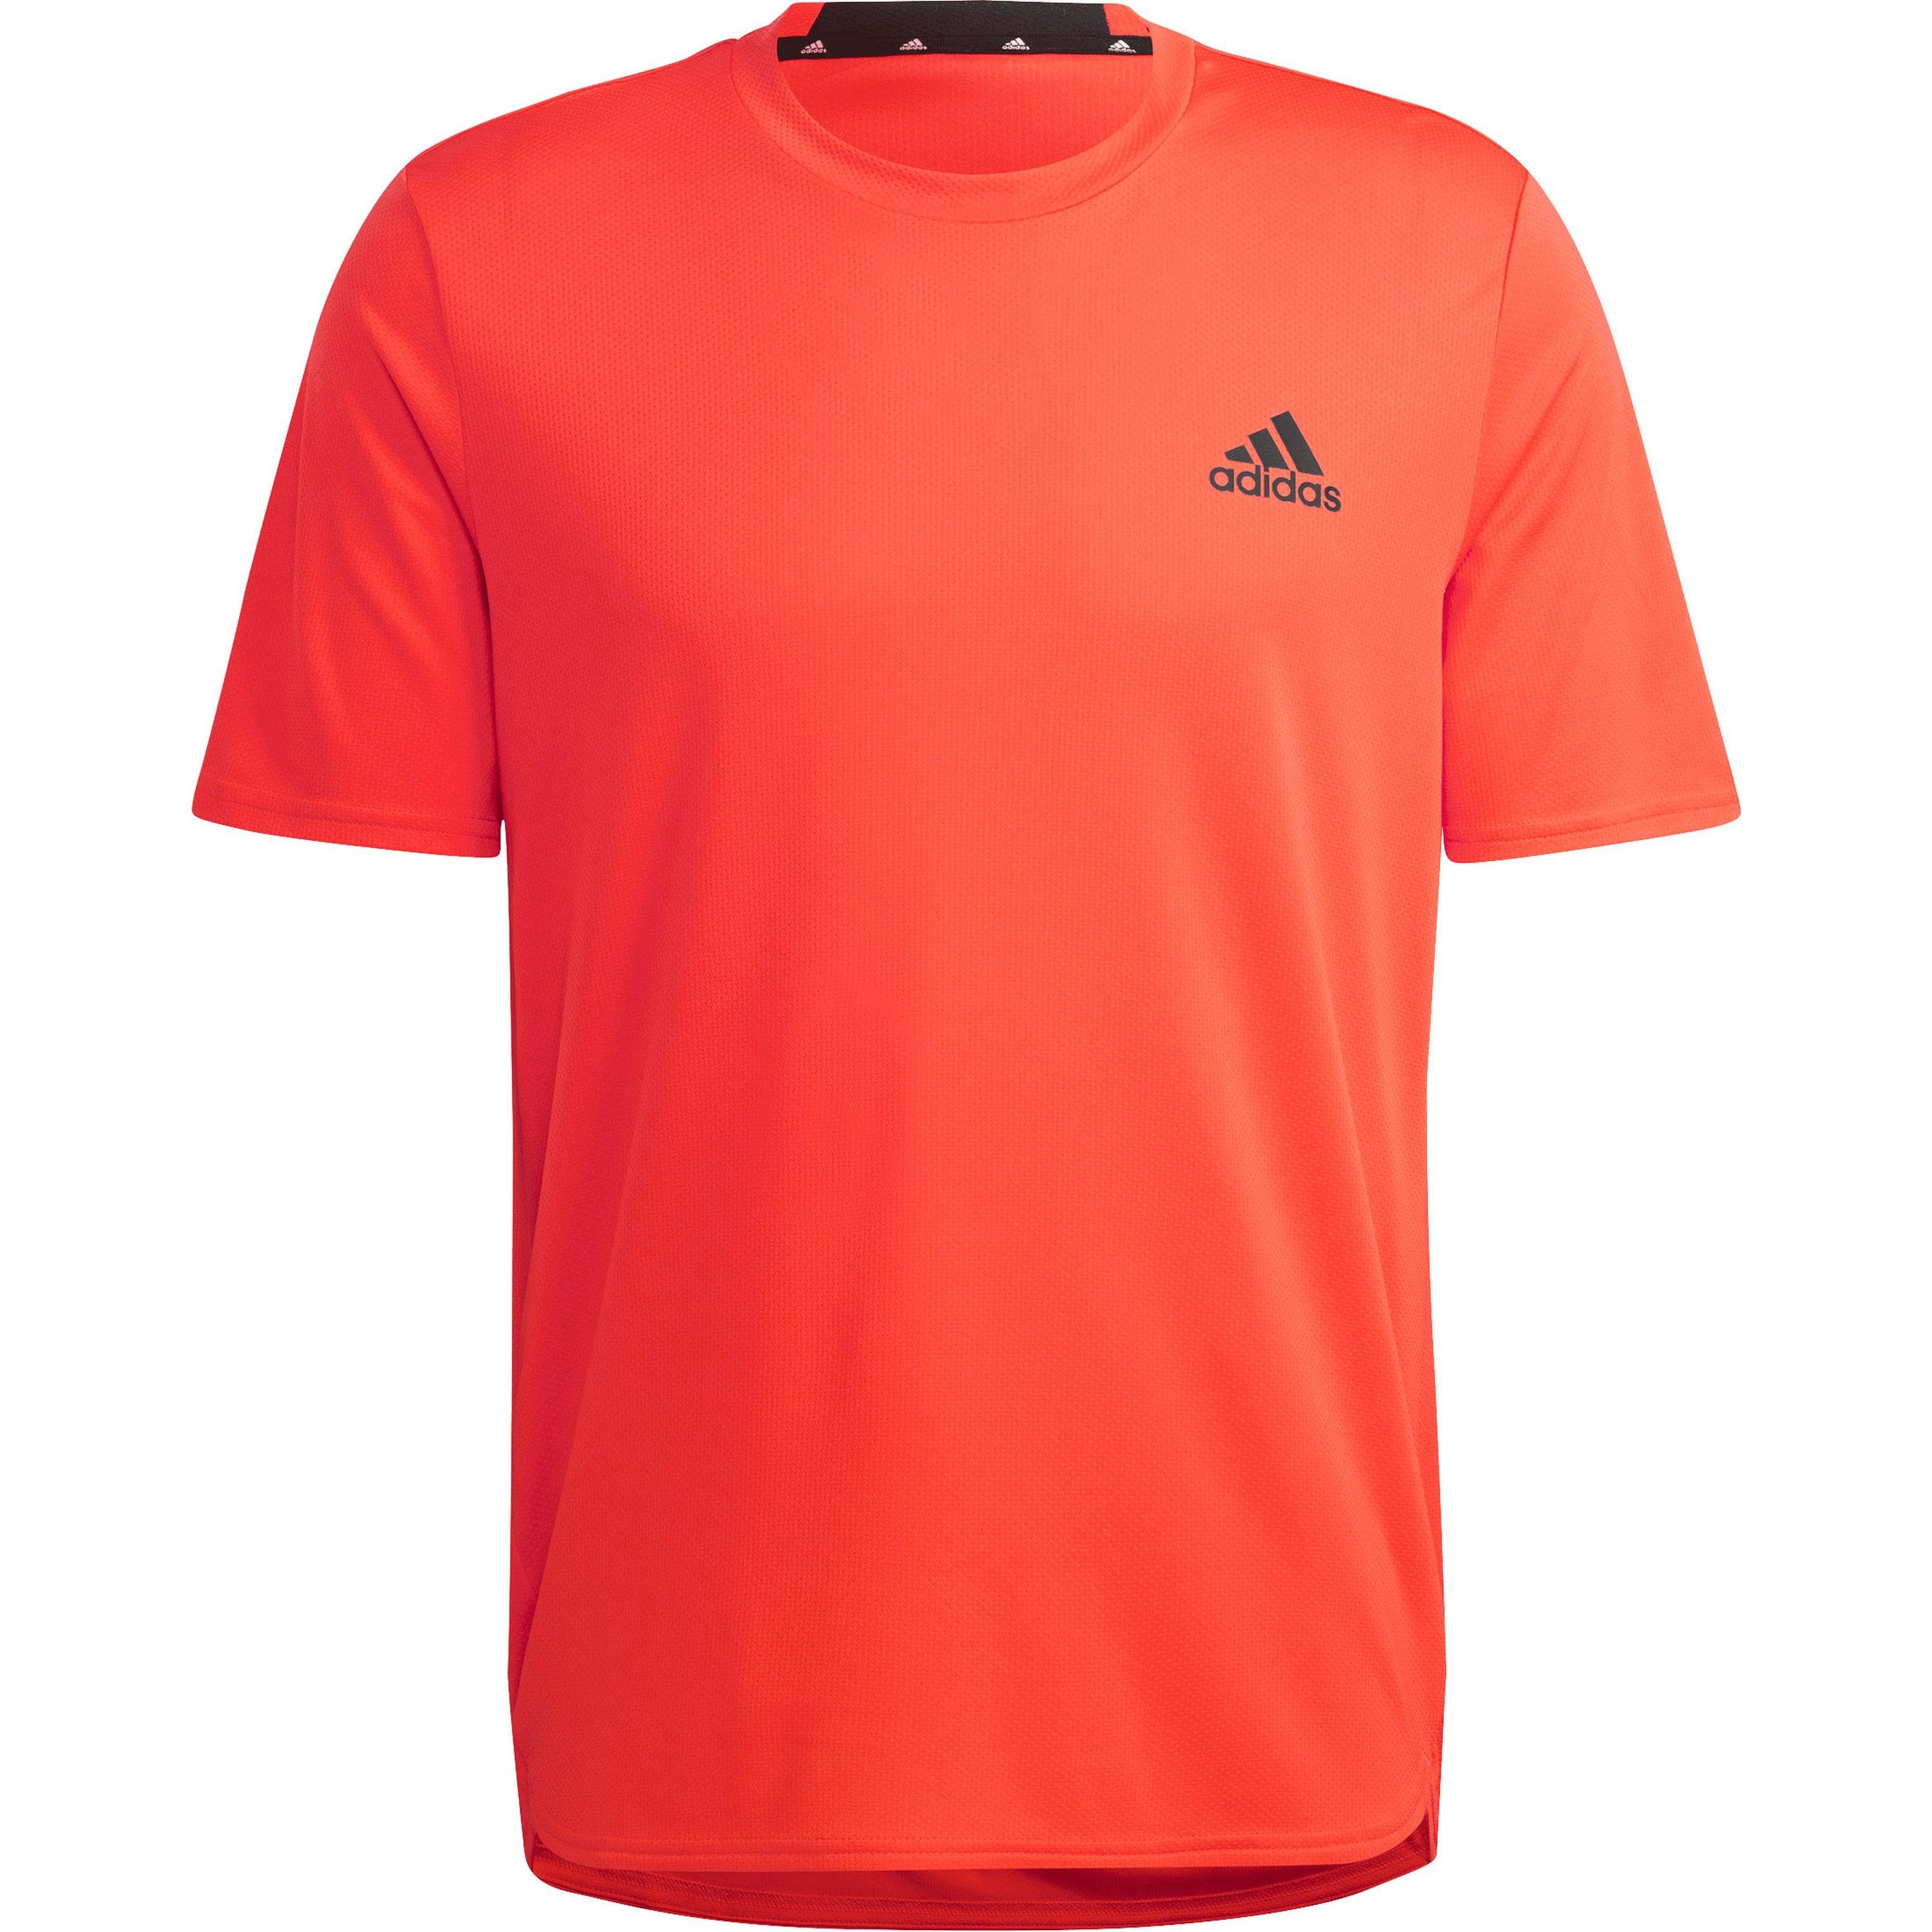 adidas Performance Funktionsshirt AEROREADY DESIGNED FOR MOVEMENT bright red-black